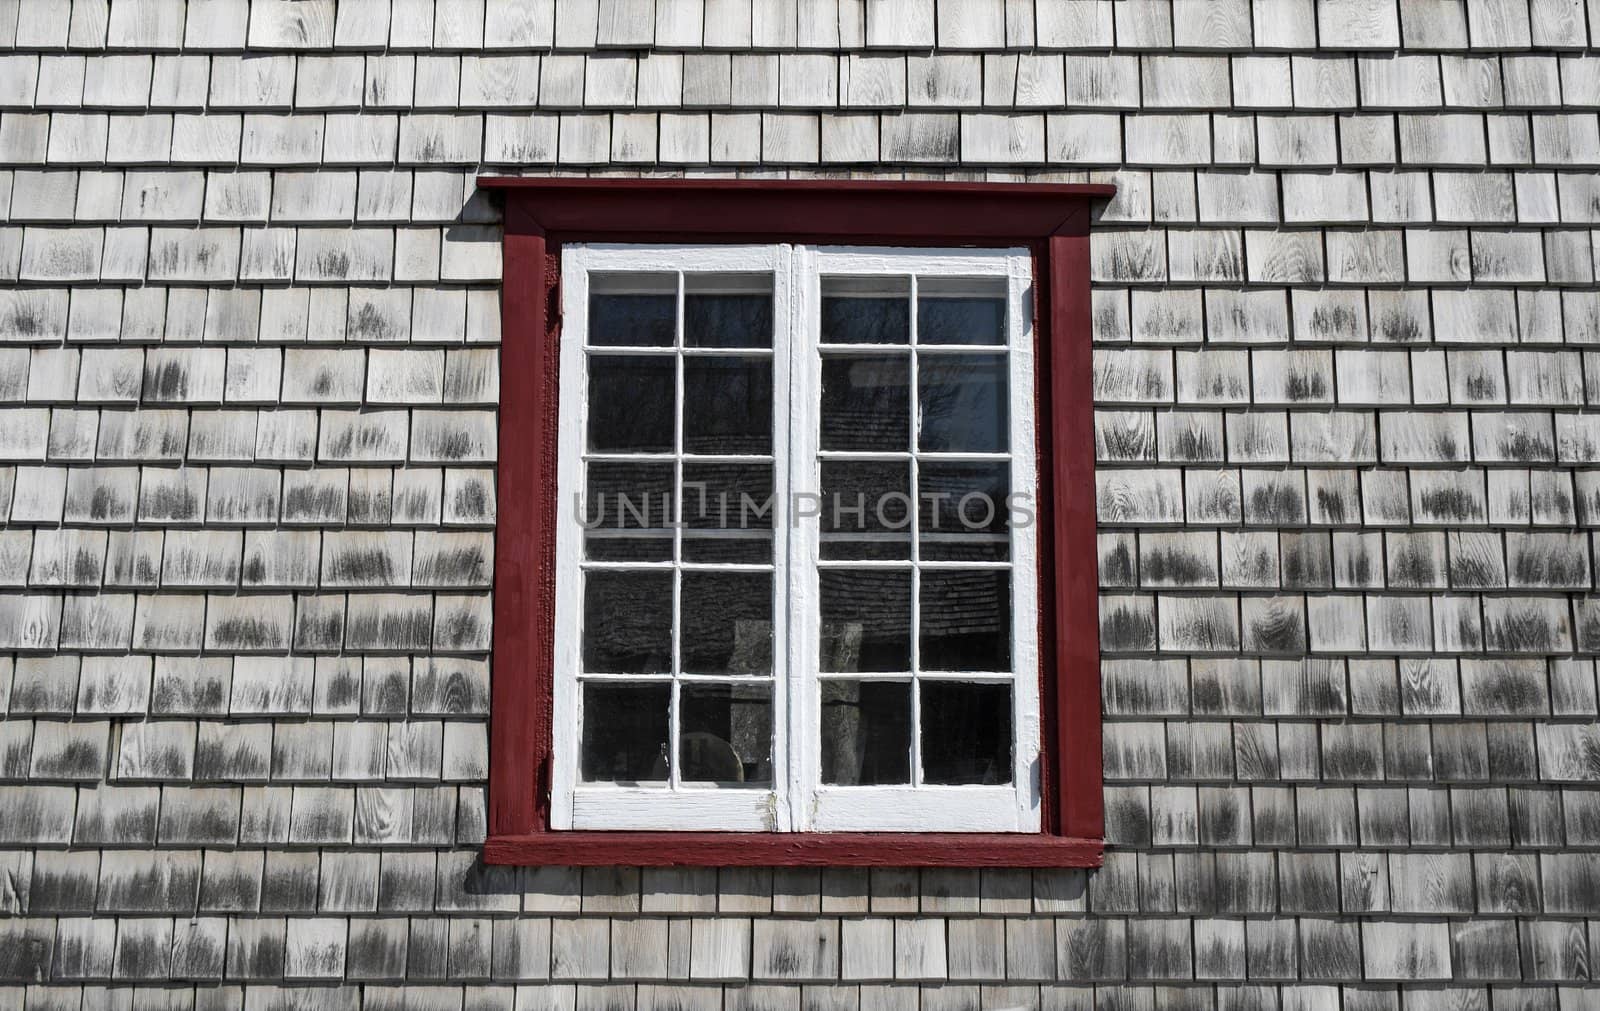 Window of an old country house with wooden tiled walls.